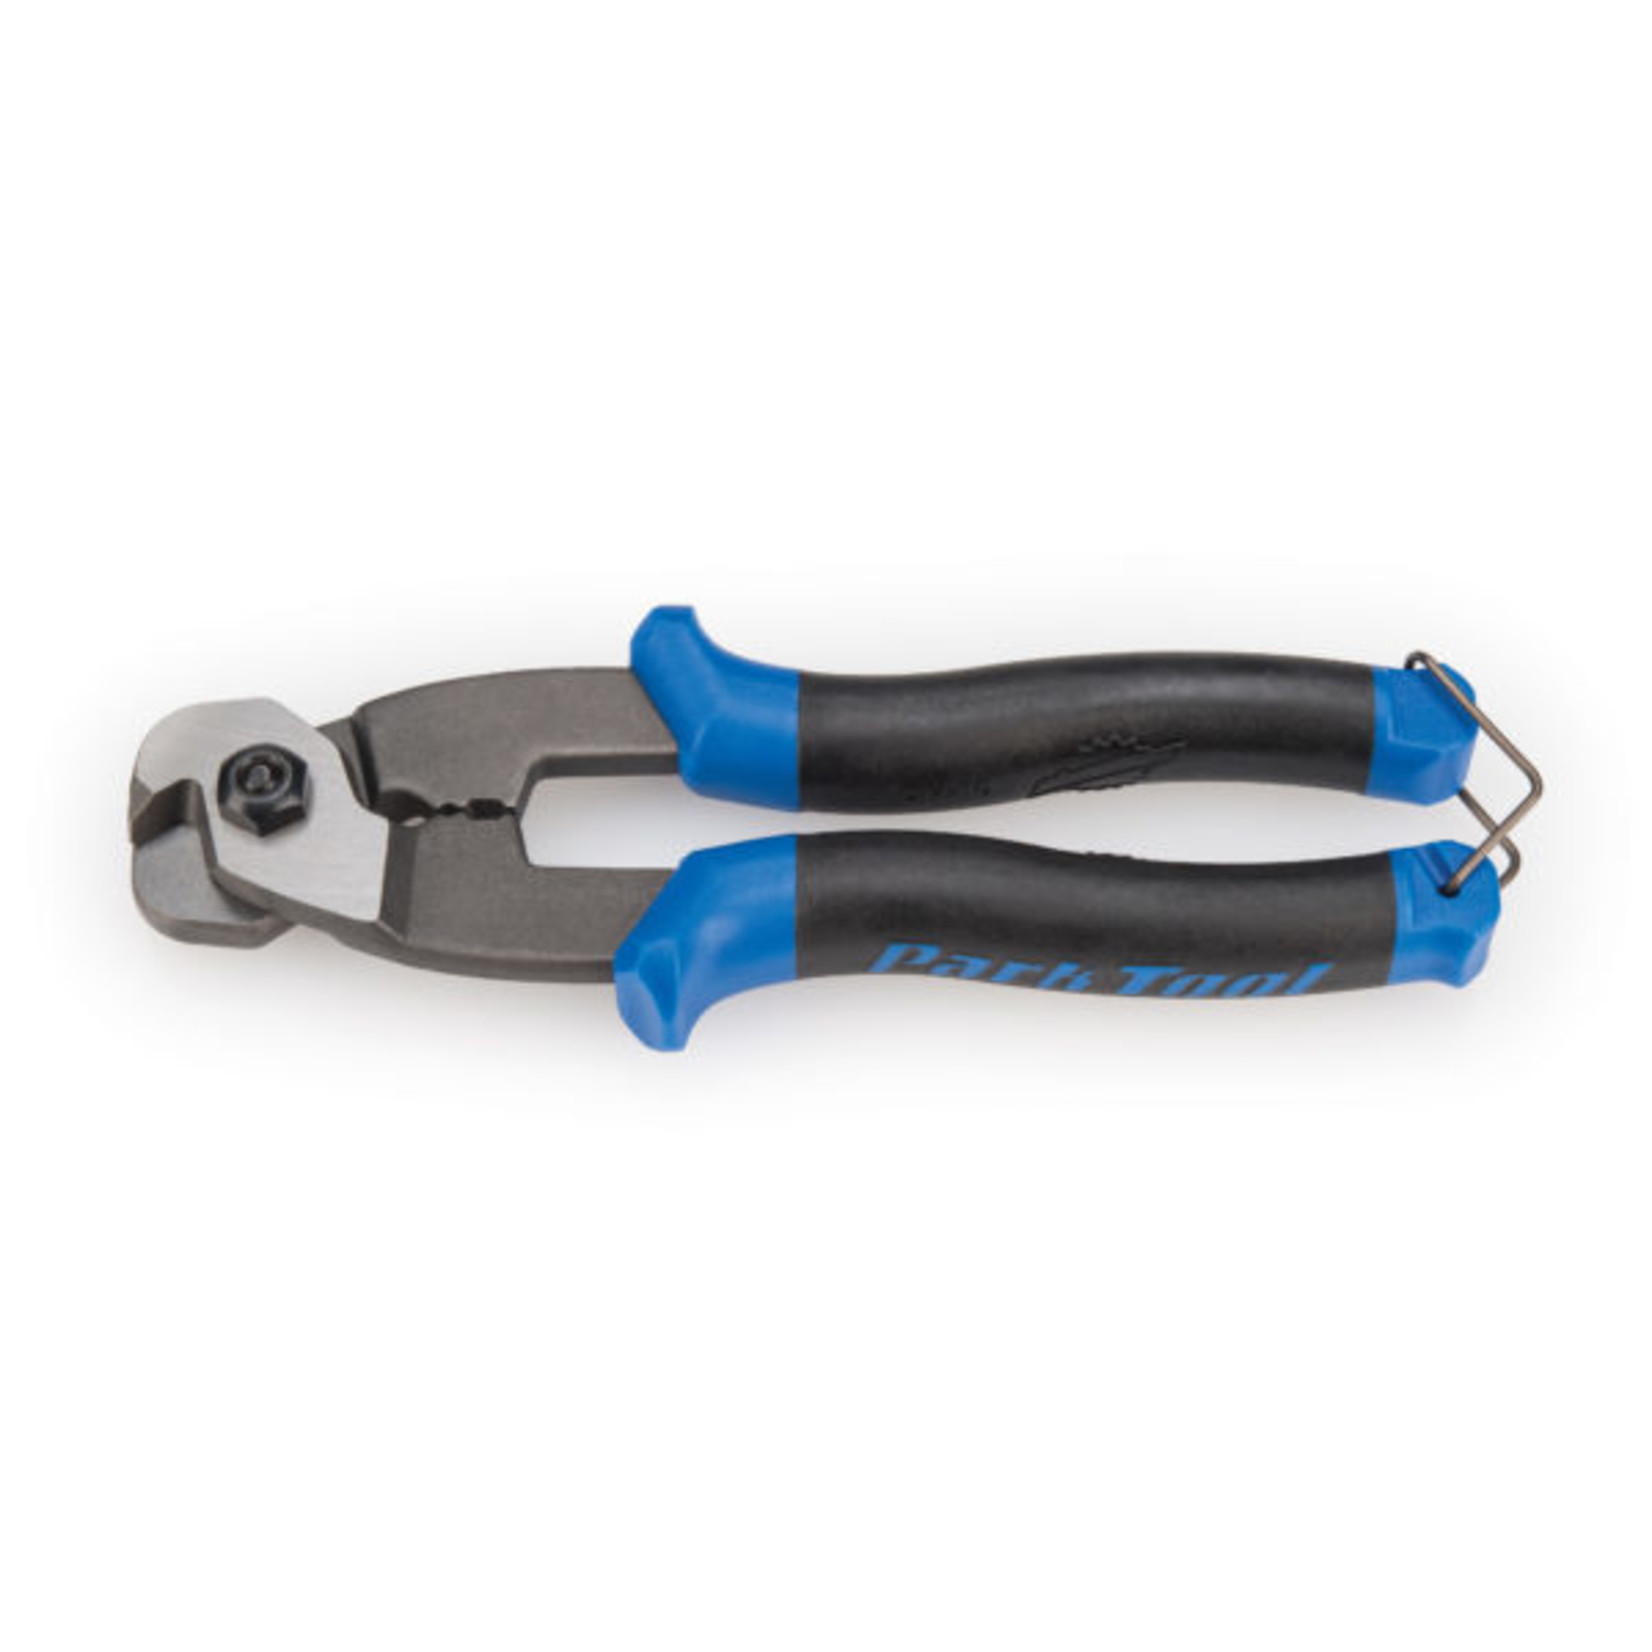 Park Tools Park Tool CN-10 Cable & Housing Cutter